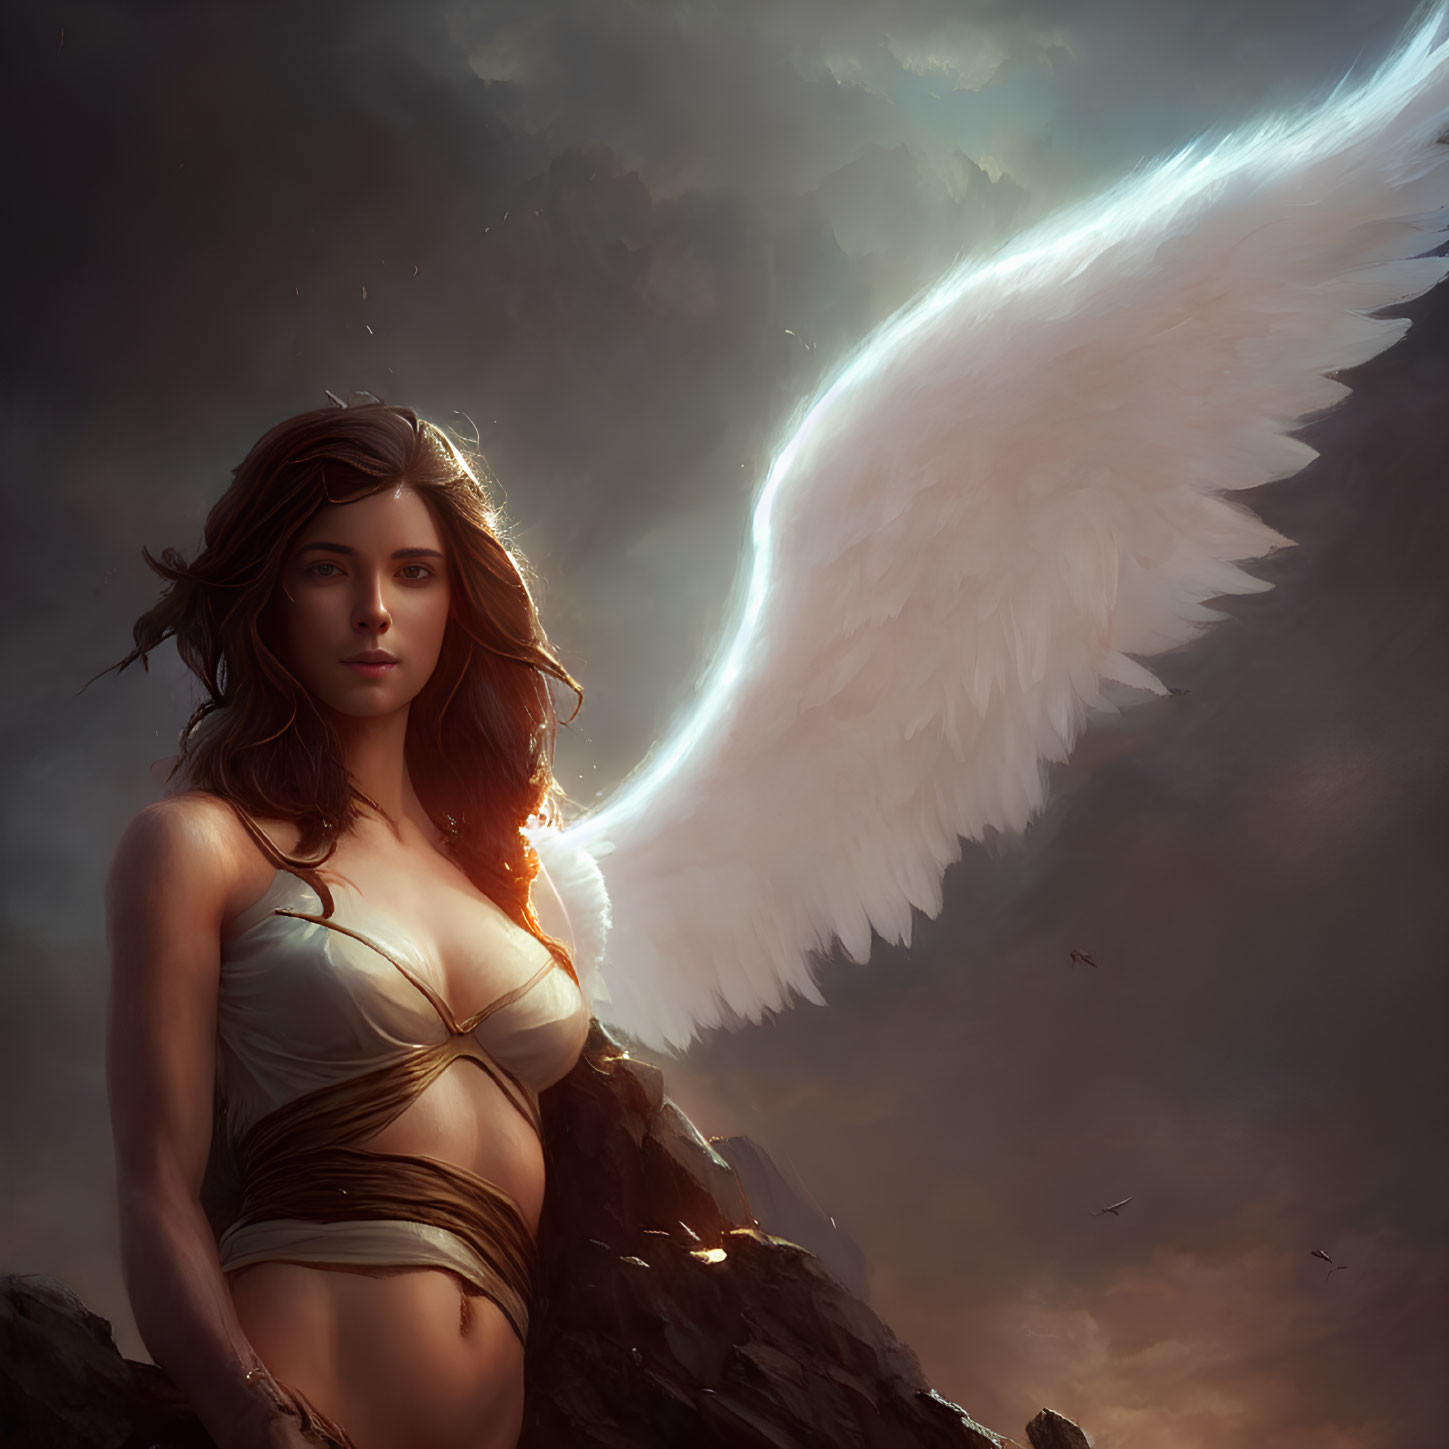 Woman with Large White Wing on Rocky Overlook under Dramatic Sky